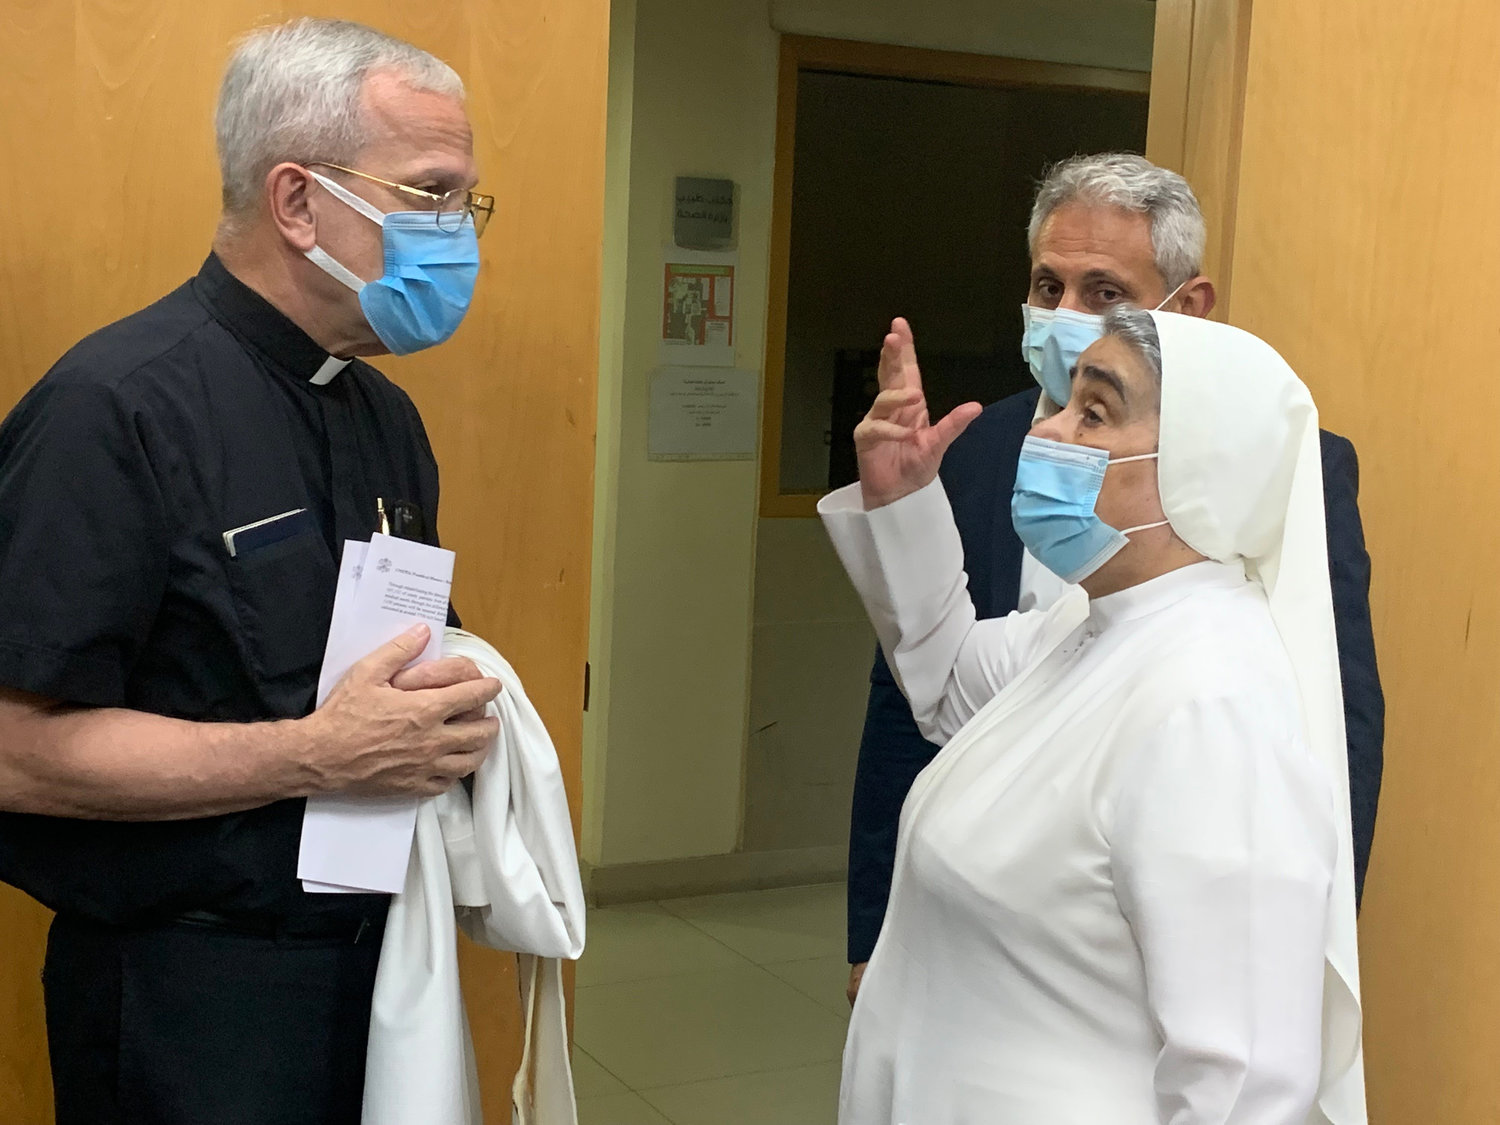 Msgr. Peter Vaccari, president of the Catholic Near East Welfare Association in Manhattan, speaks with Rosary Sister Nicola Akiki, director of the Rosary Sisters hospital in Beirut Aug. 4.